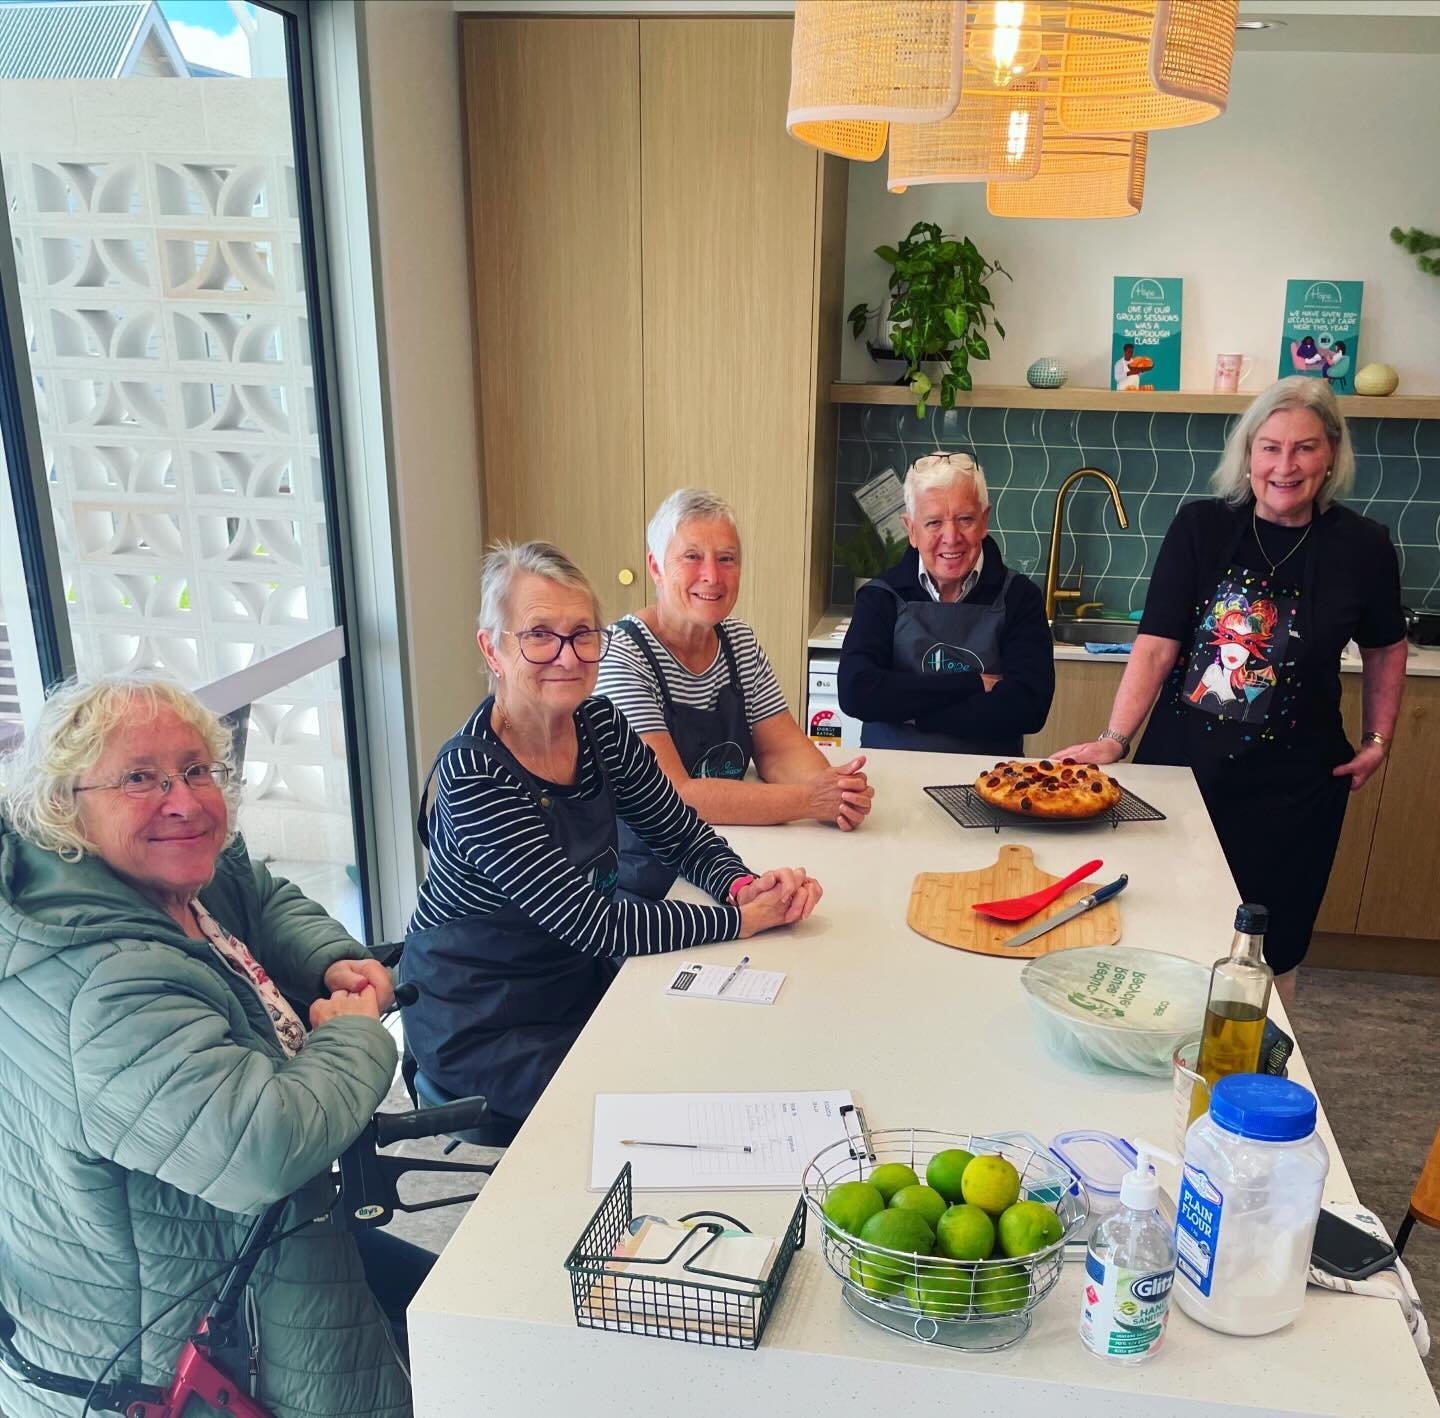 This morning our Jenny Black Cancer Wellness centre had the beautiful aroma of &ldquo;hot focaccia cooking&rdquo; wafting. Thank you again to Mary @mary_alannah for sharing your skill! @noosasourdoughco  thank you 😊 🍞🥖🥐🥯🍕#livingwellwithcancer #